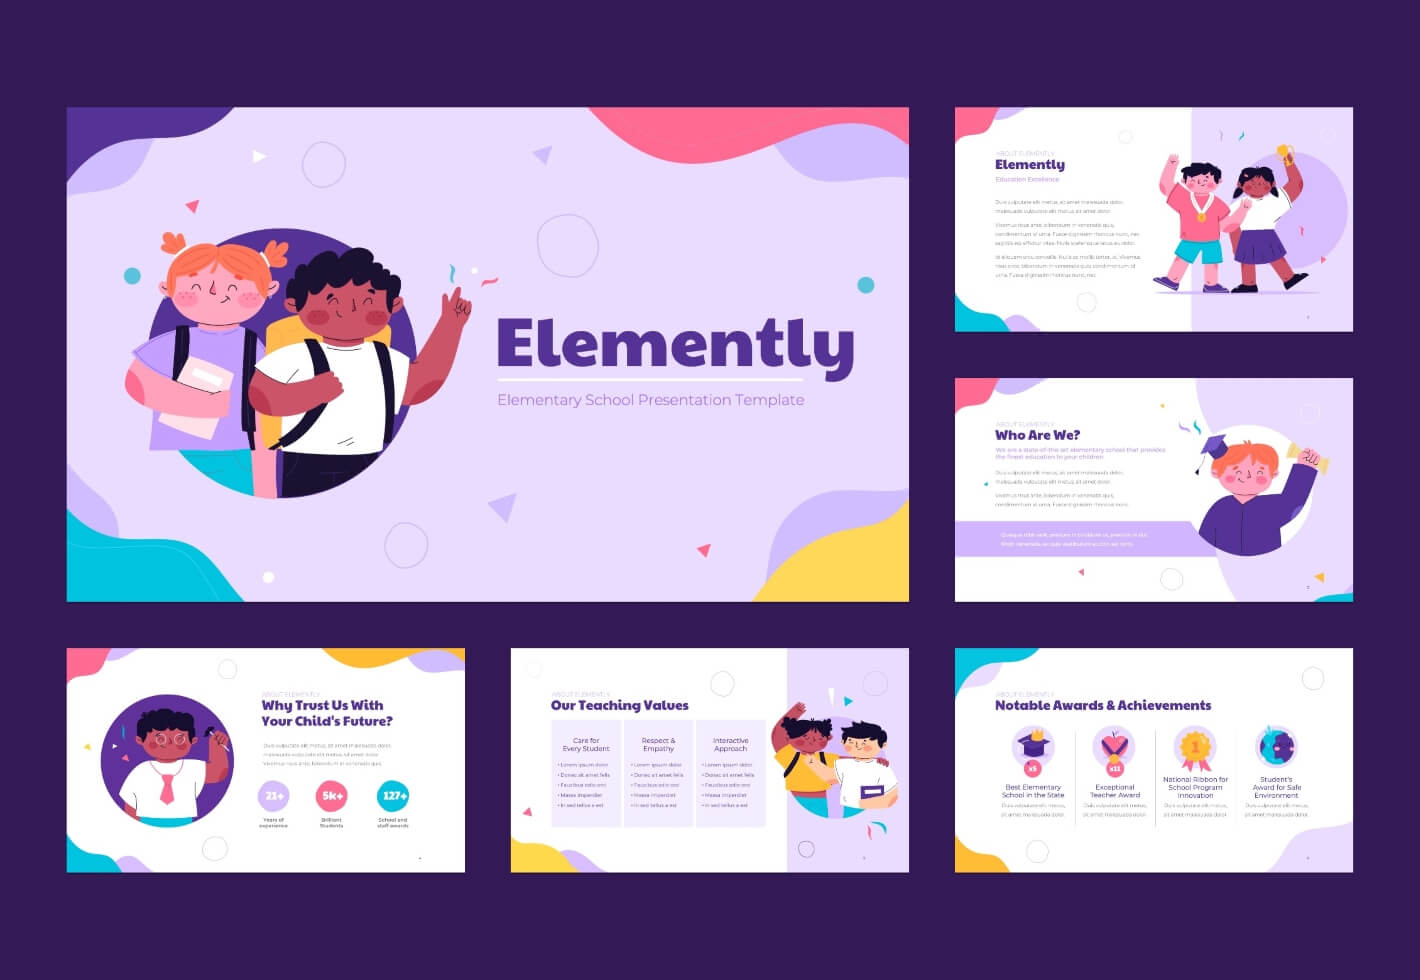 Elemently Elementary Powerpoint Presentation Template Graphue Riset